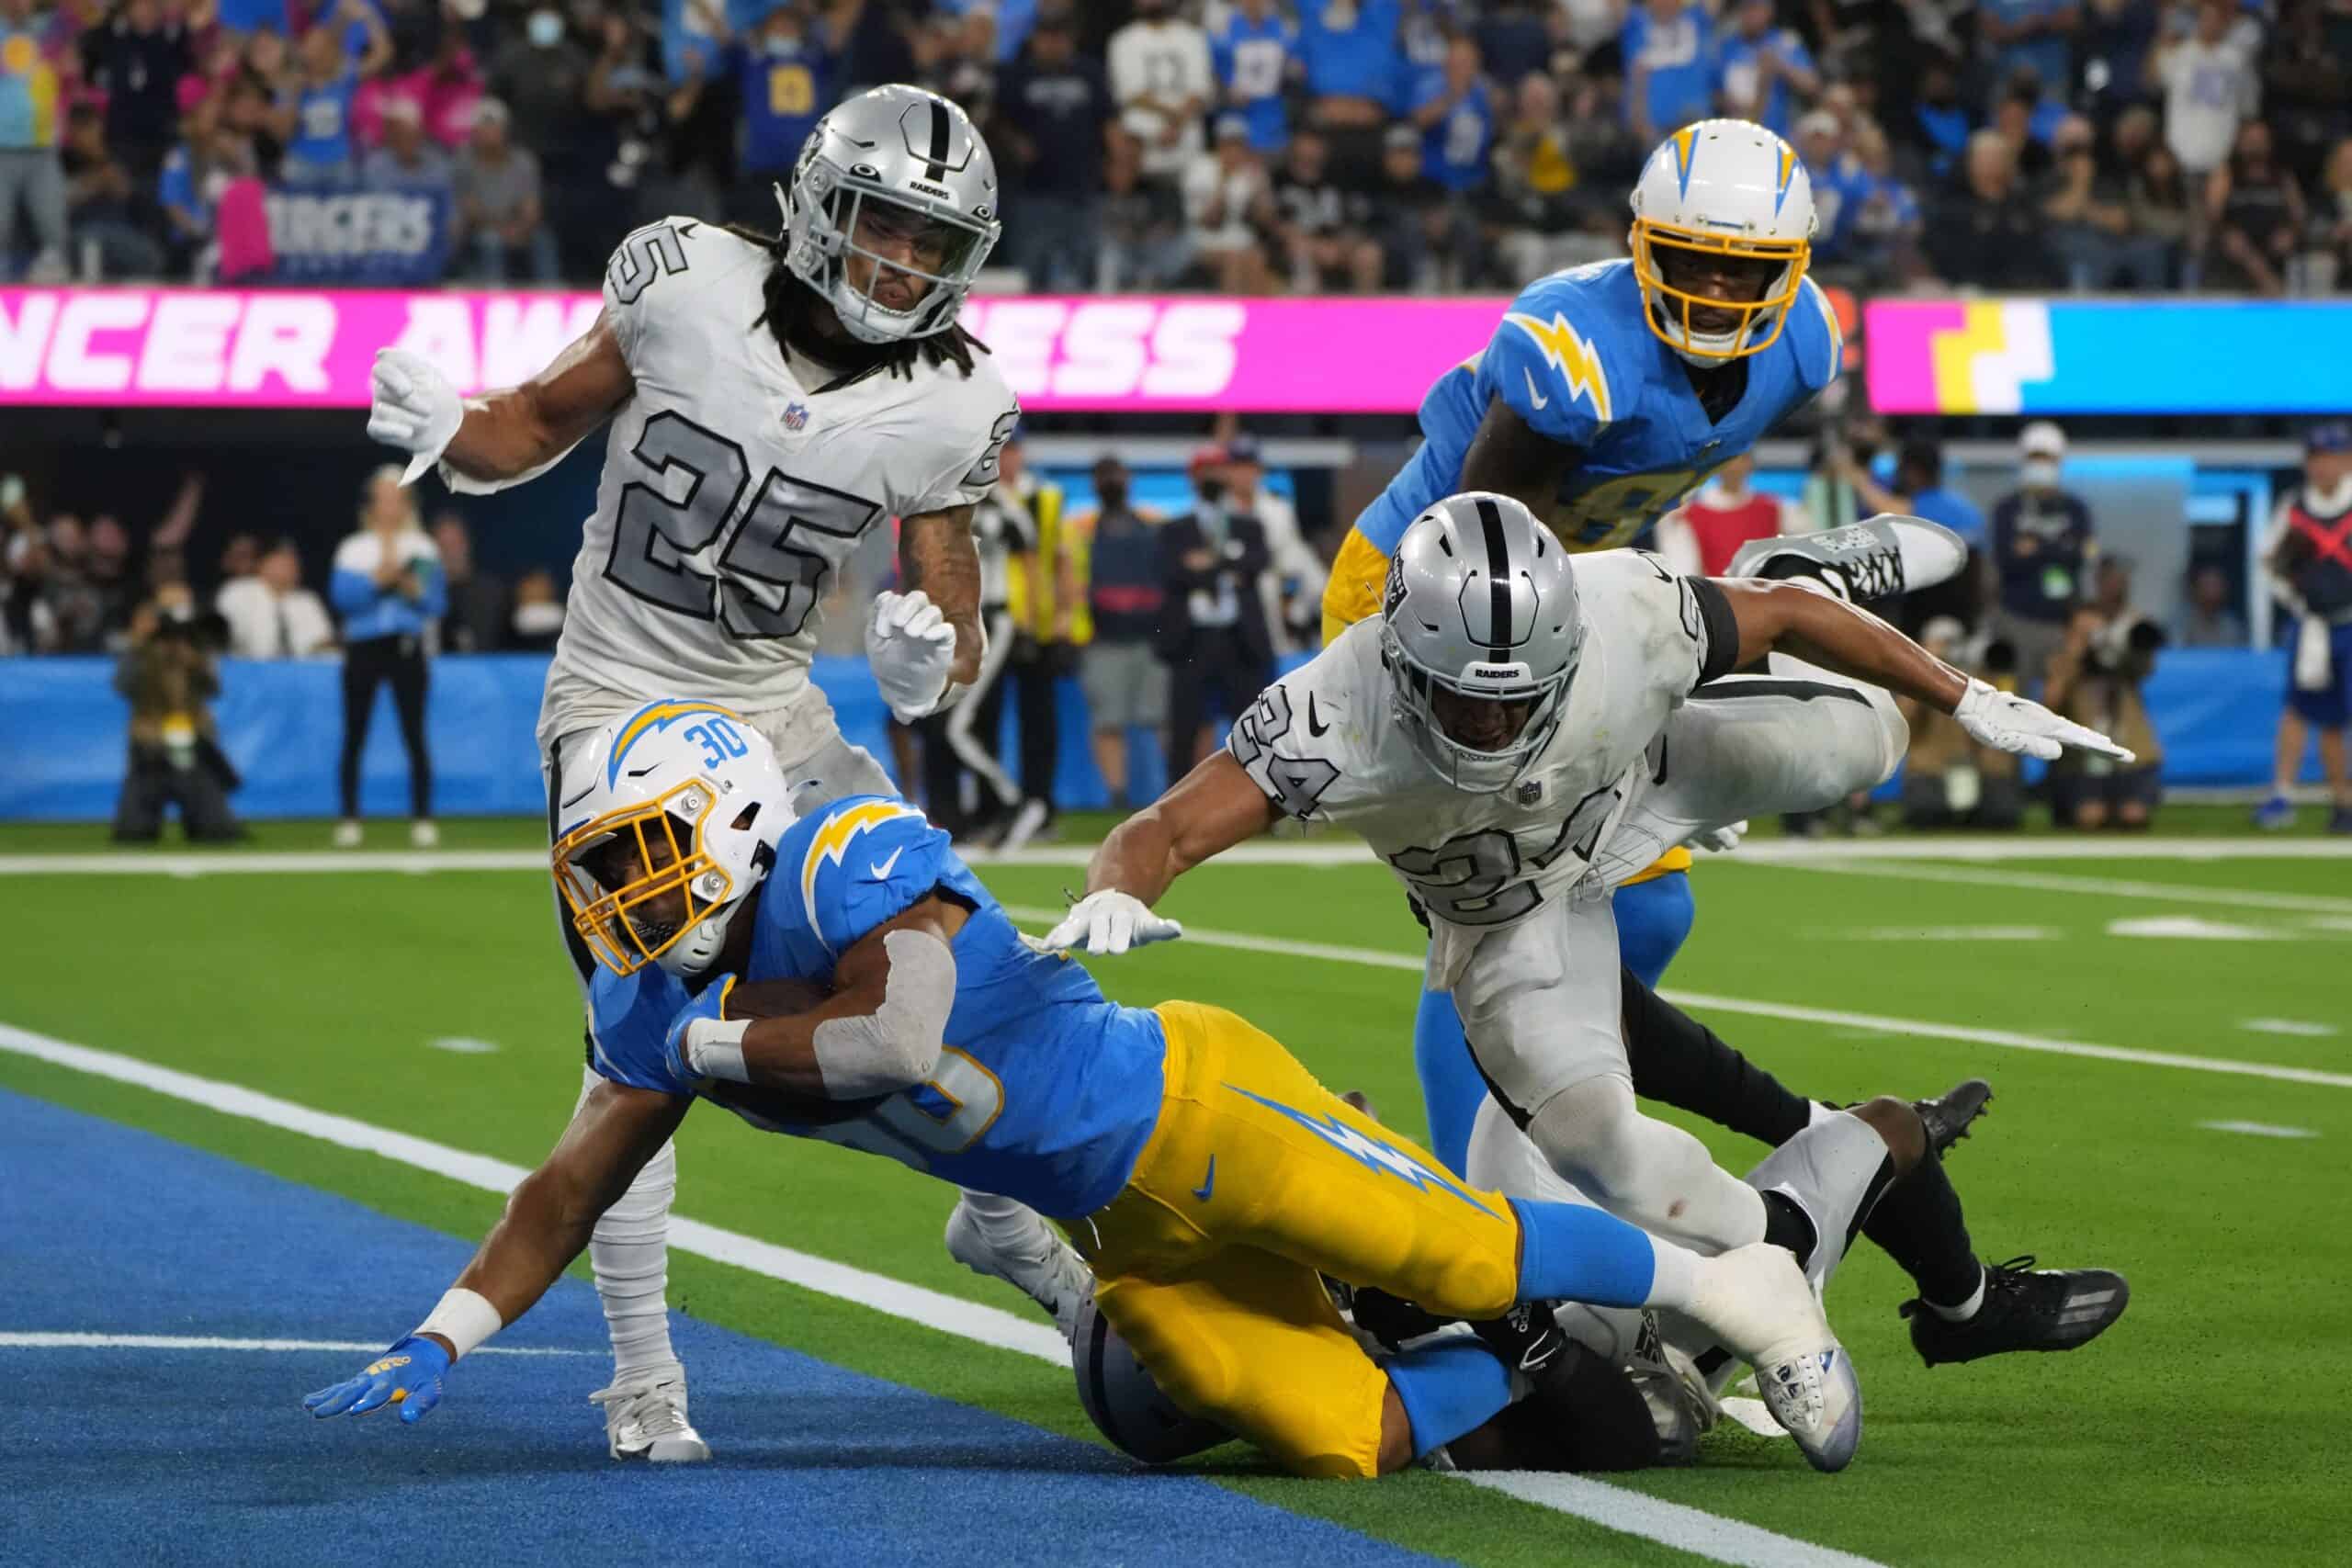 NFL Schedule Week 18: Raiders vs. Chargers elimination game on